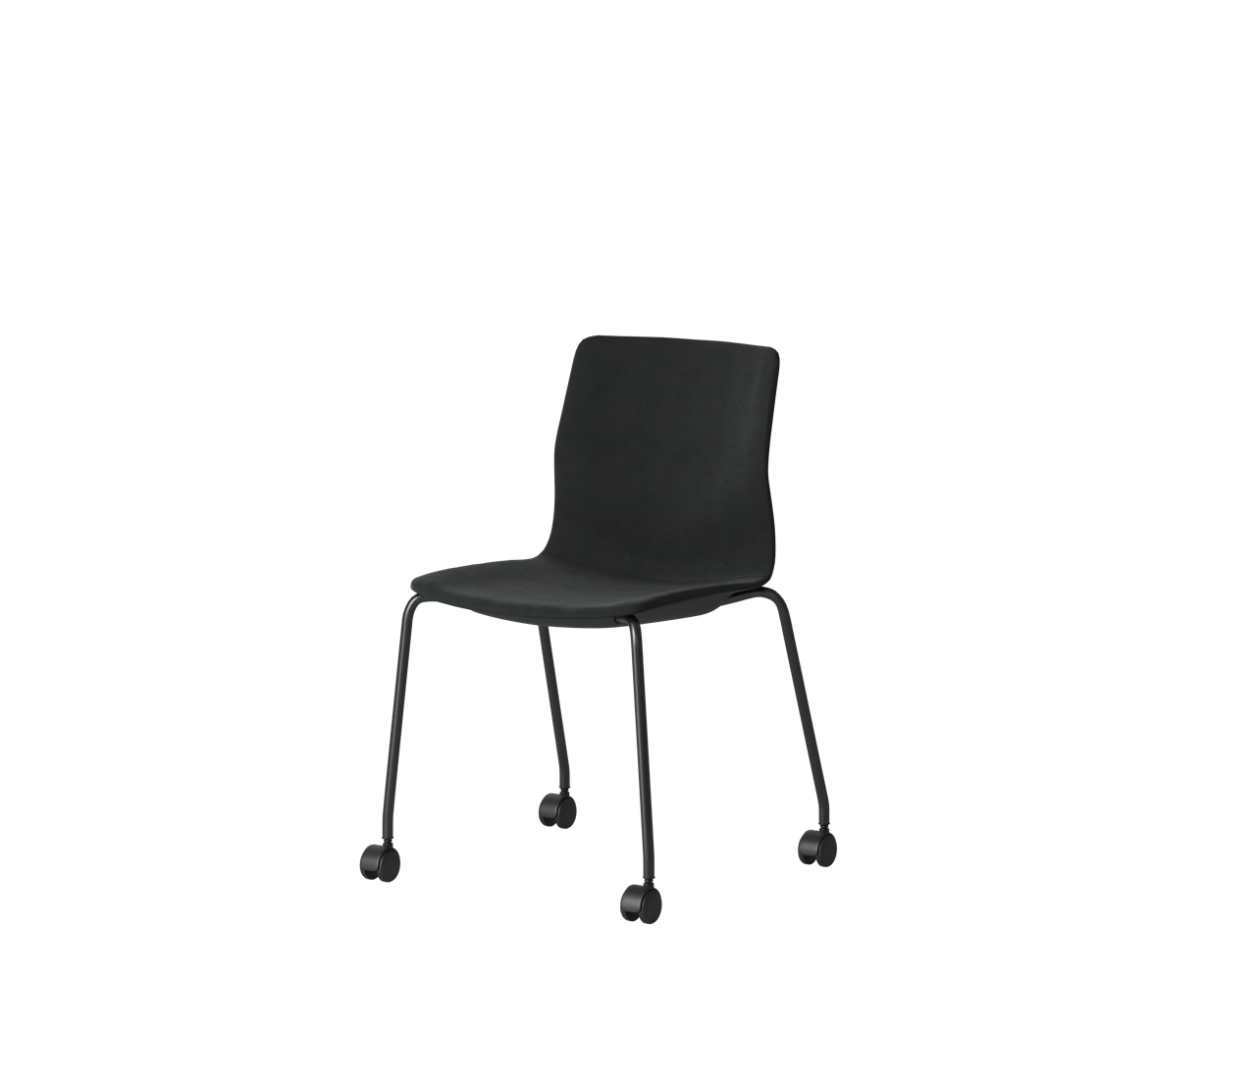 OCEE&FOUR – Chairs – FourSure 77 – Plastic shell - Fully Upholstered - Castors - Packshot Image 1 Large